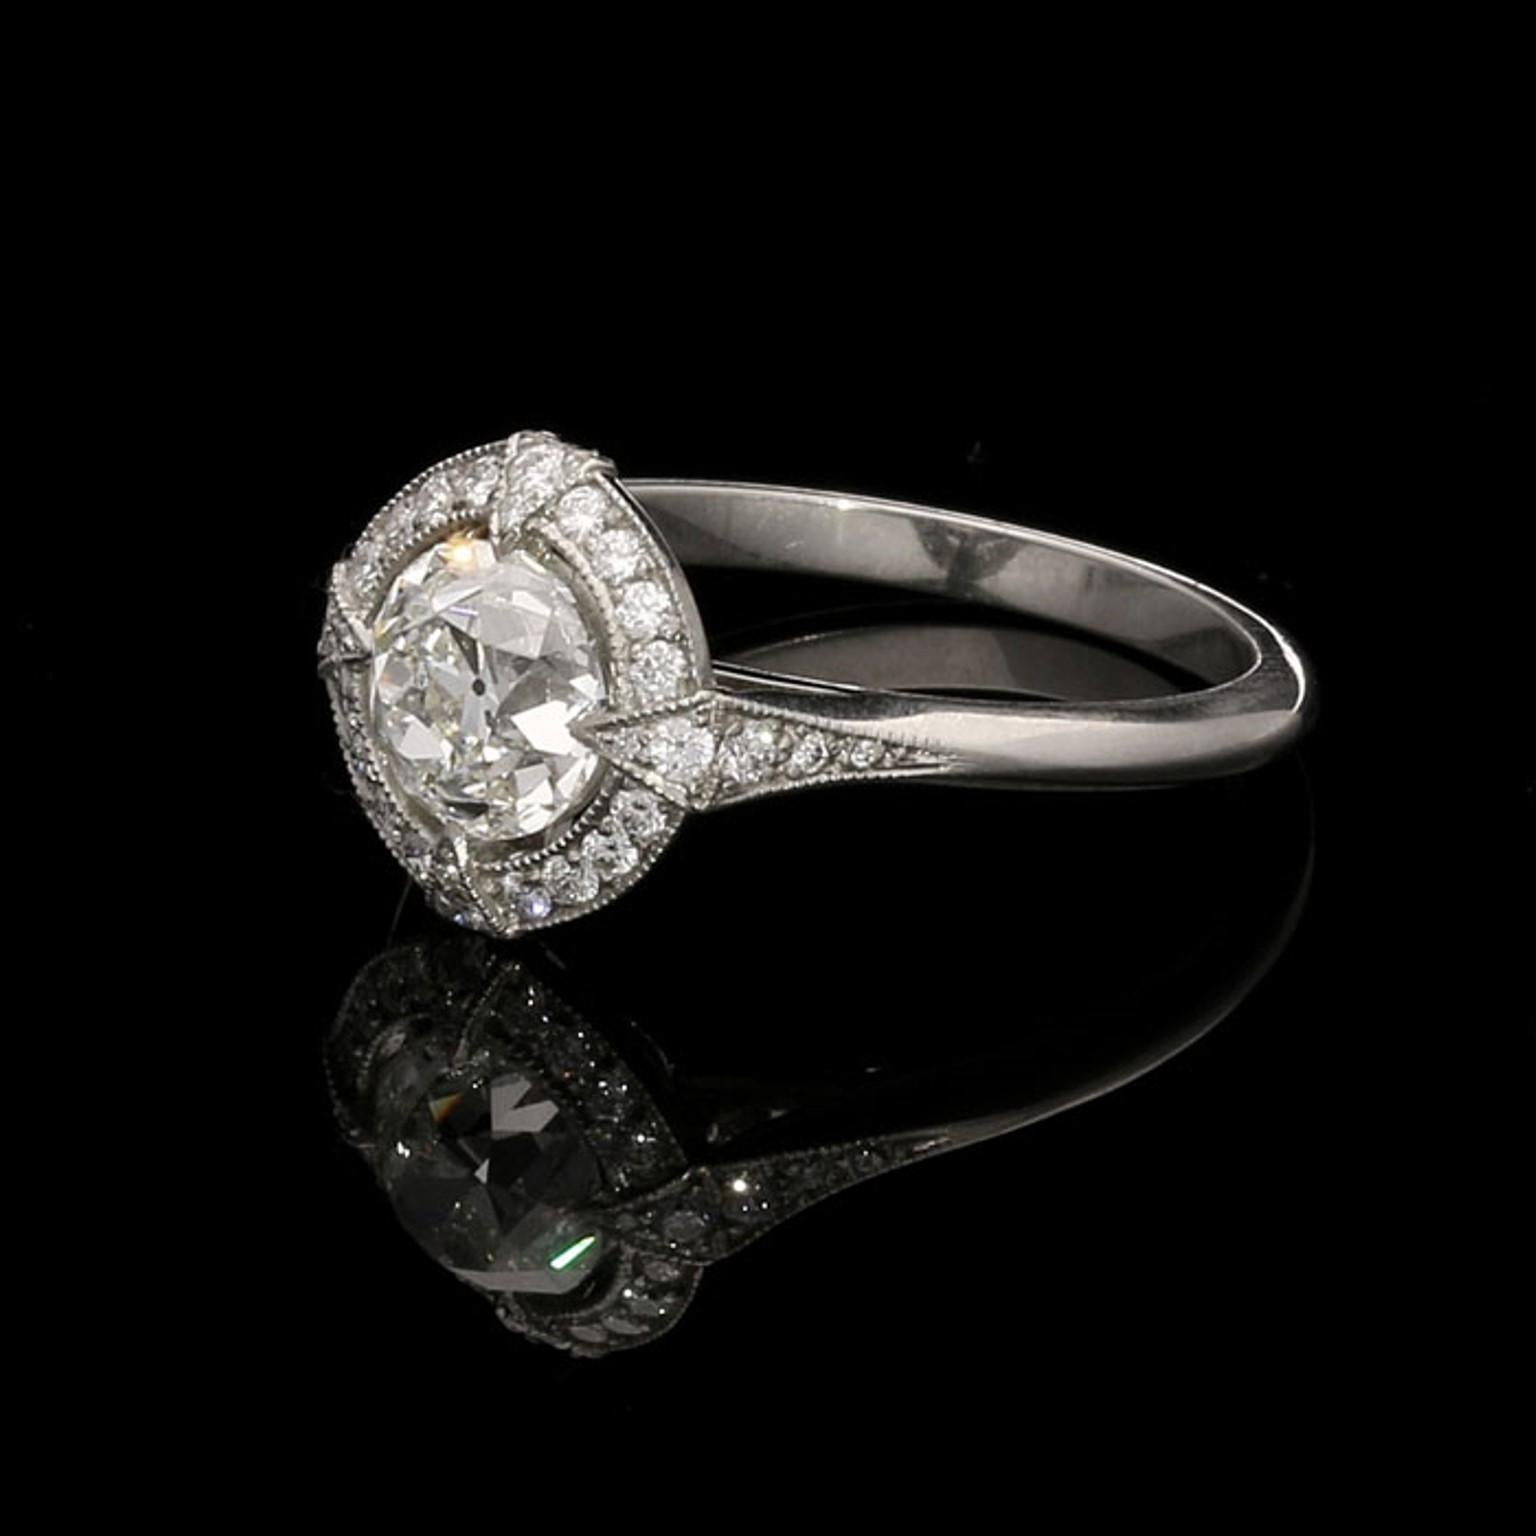 1.15ct I VVS1 Old European Brilliant cut diamond with GIA certificate
An elegant halo ring centred on an old European brilliant cut diamond by Hancocks, the bright and lively old European brilliant cut diamond weighing 1.15ct and of I colour and